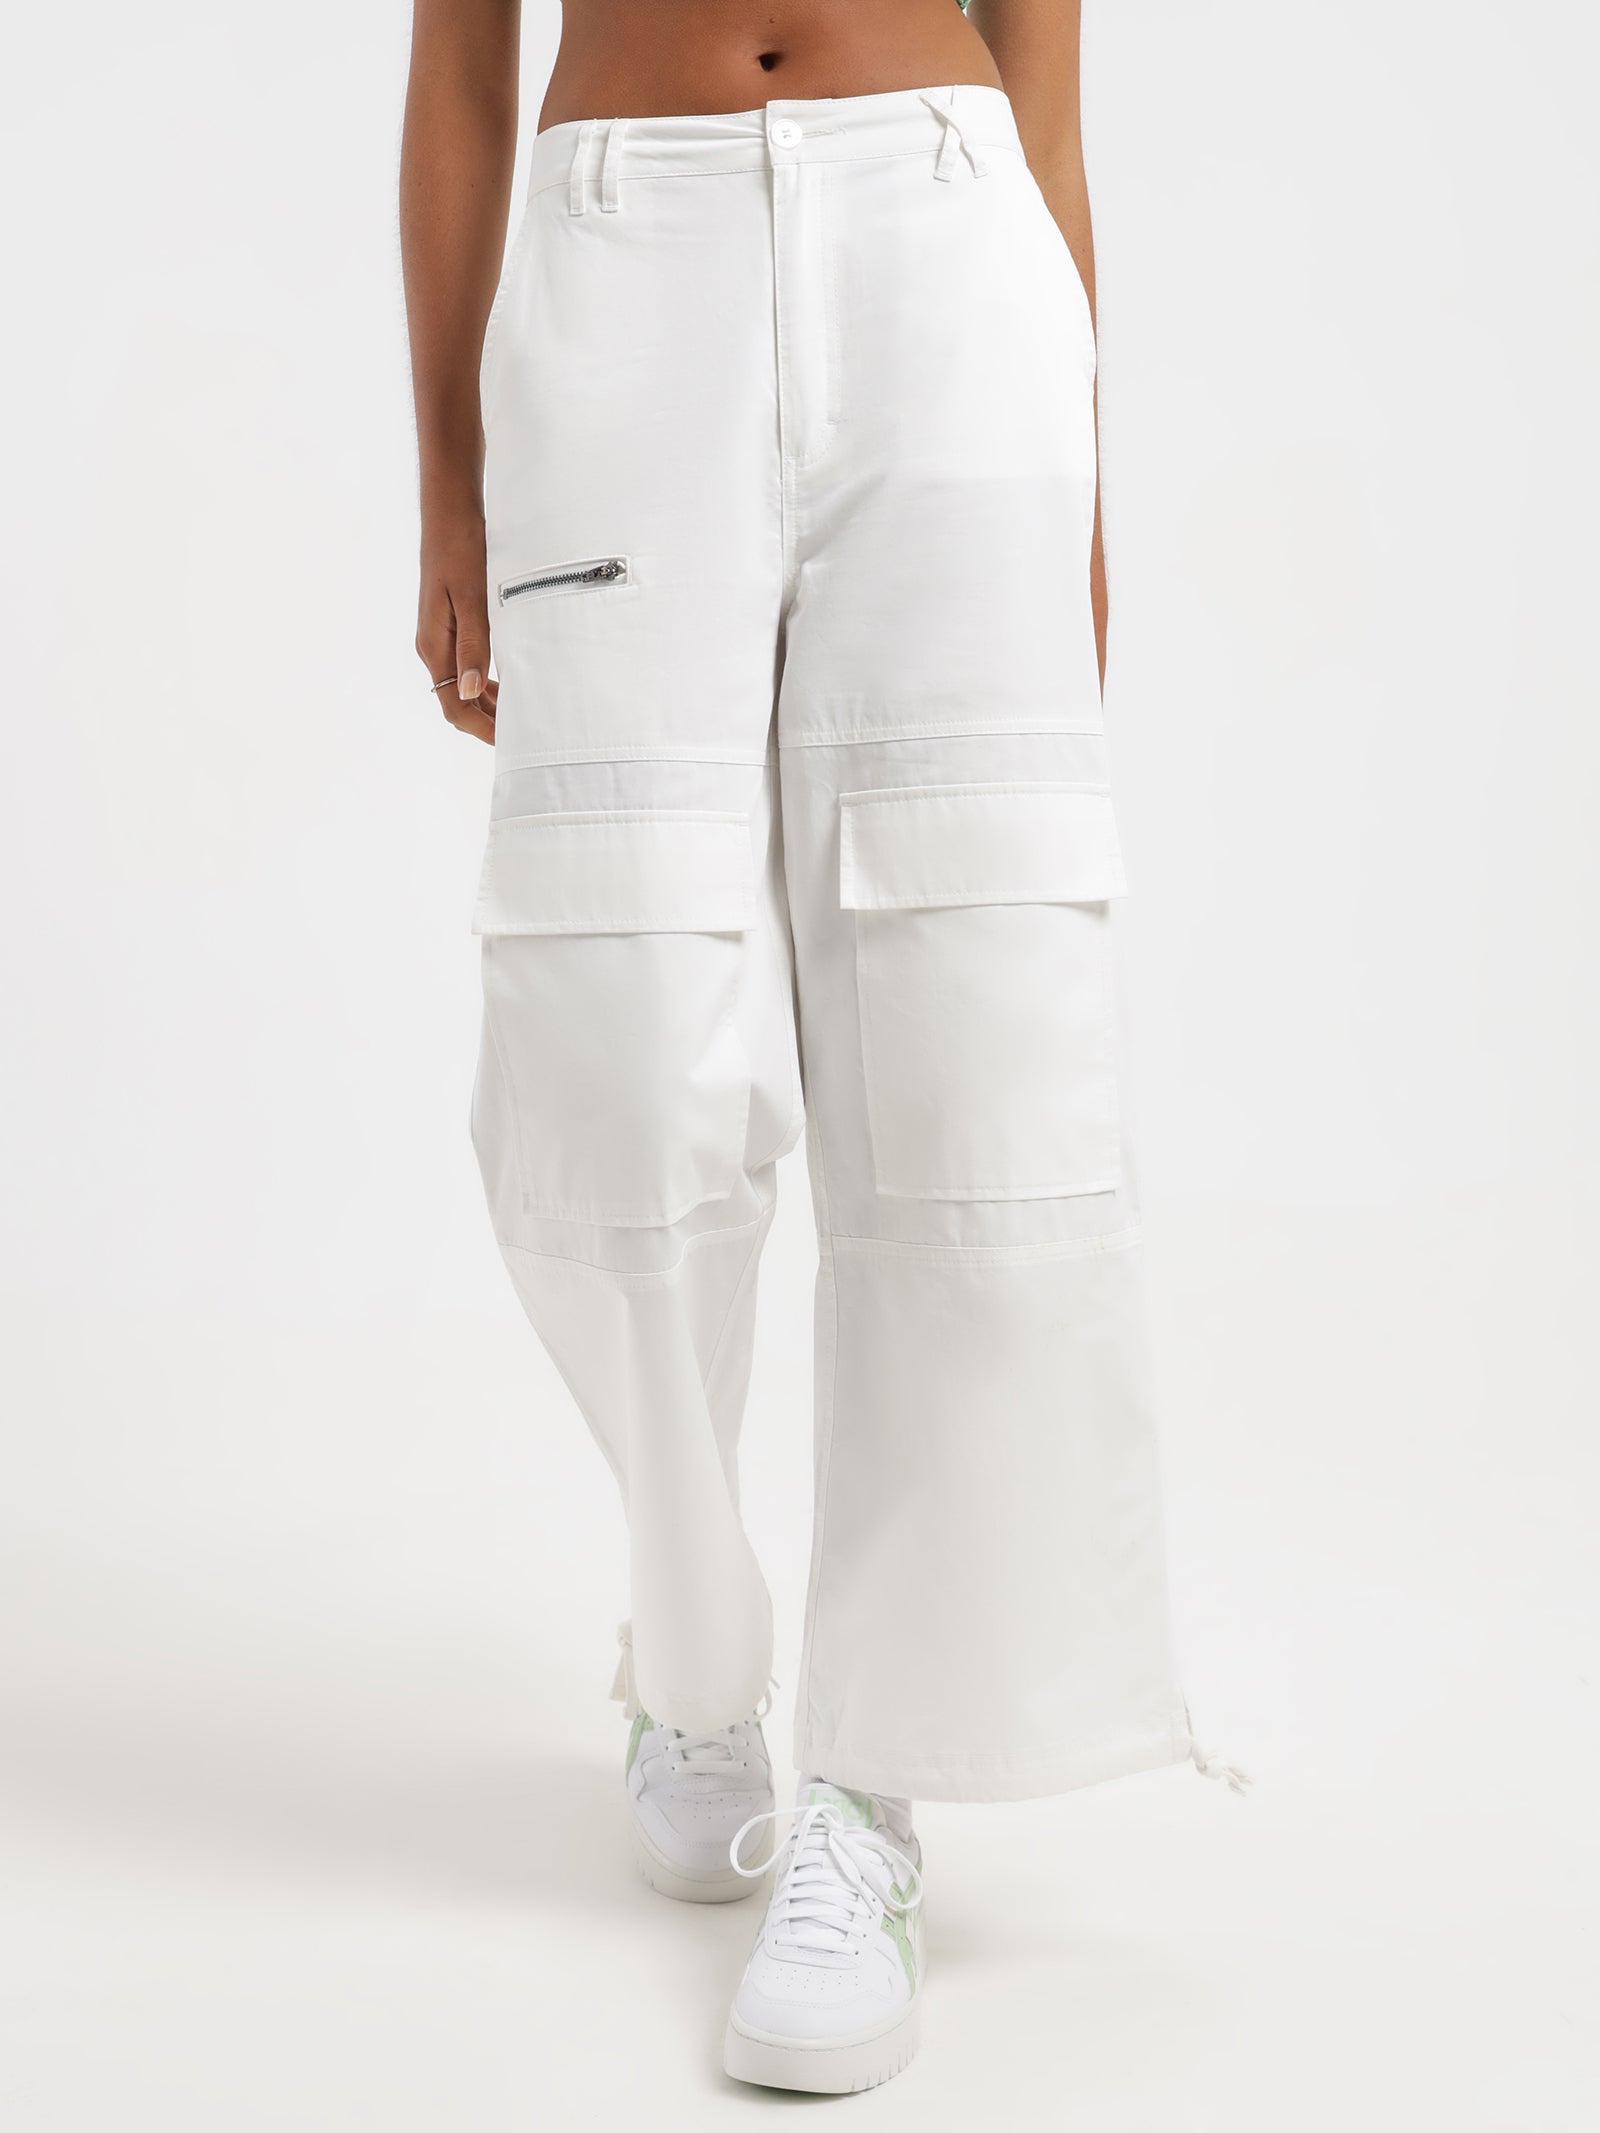 Long Stride Cargo Pants in White